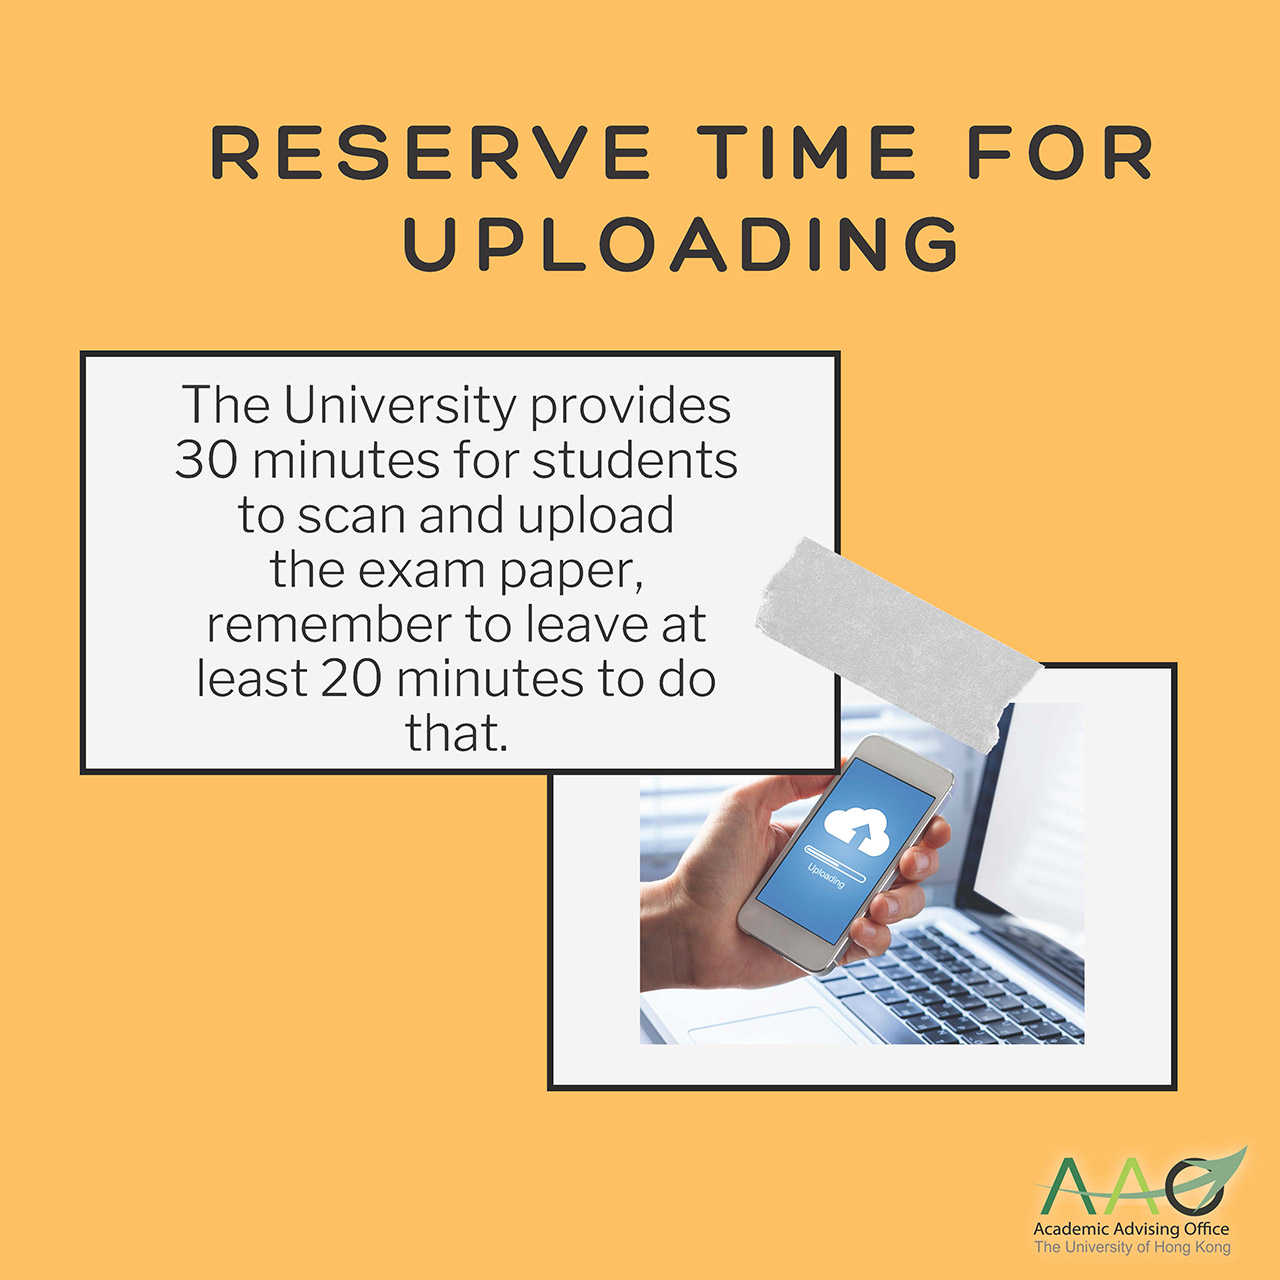 Reserve Time for Uploading. The University provides 30 minutes for students to scan and upload the exam paper, remember to leave at least 20 minutes to do that. 